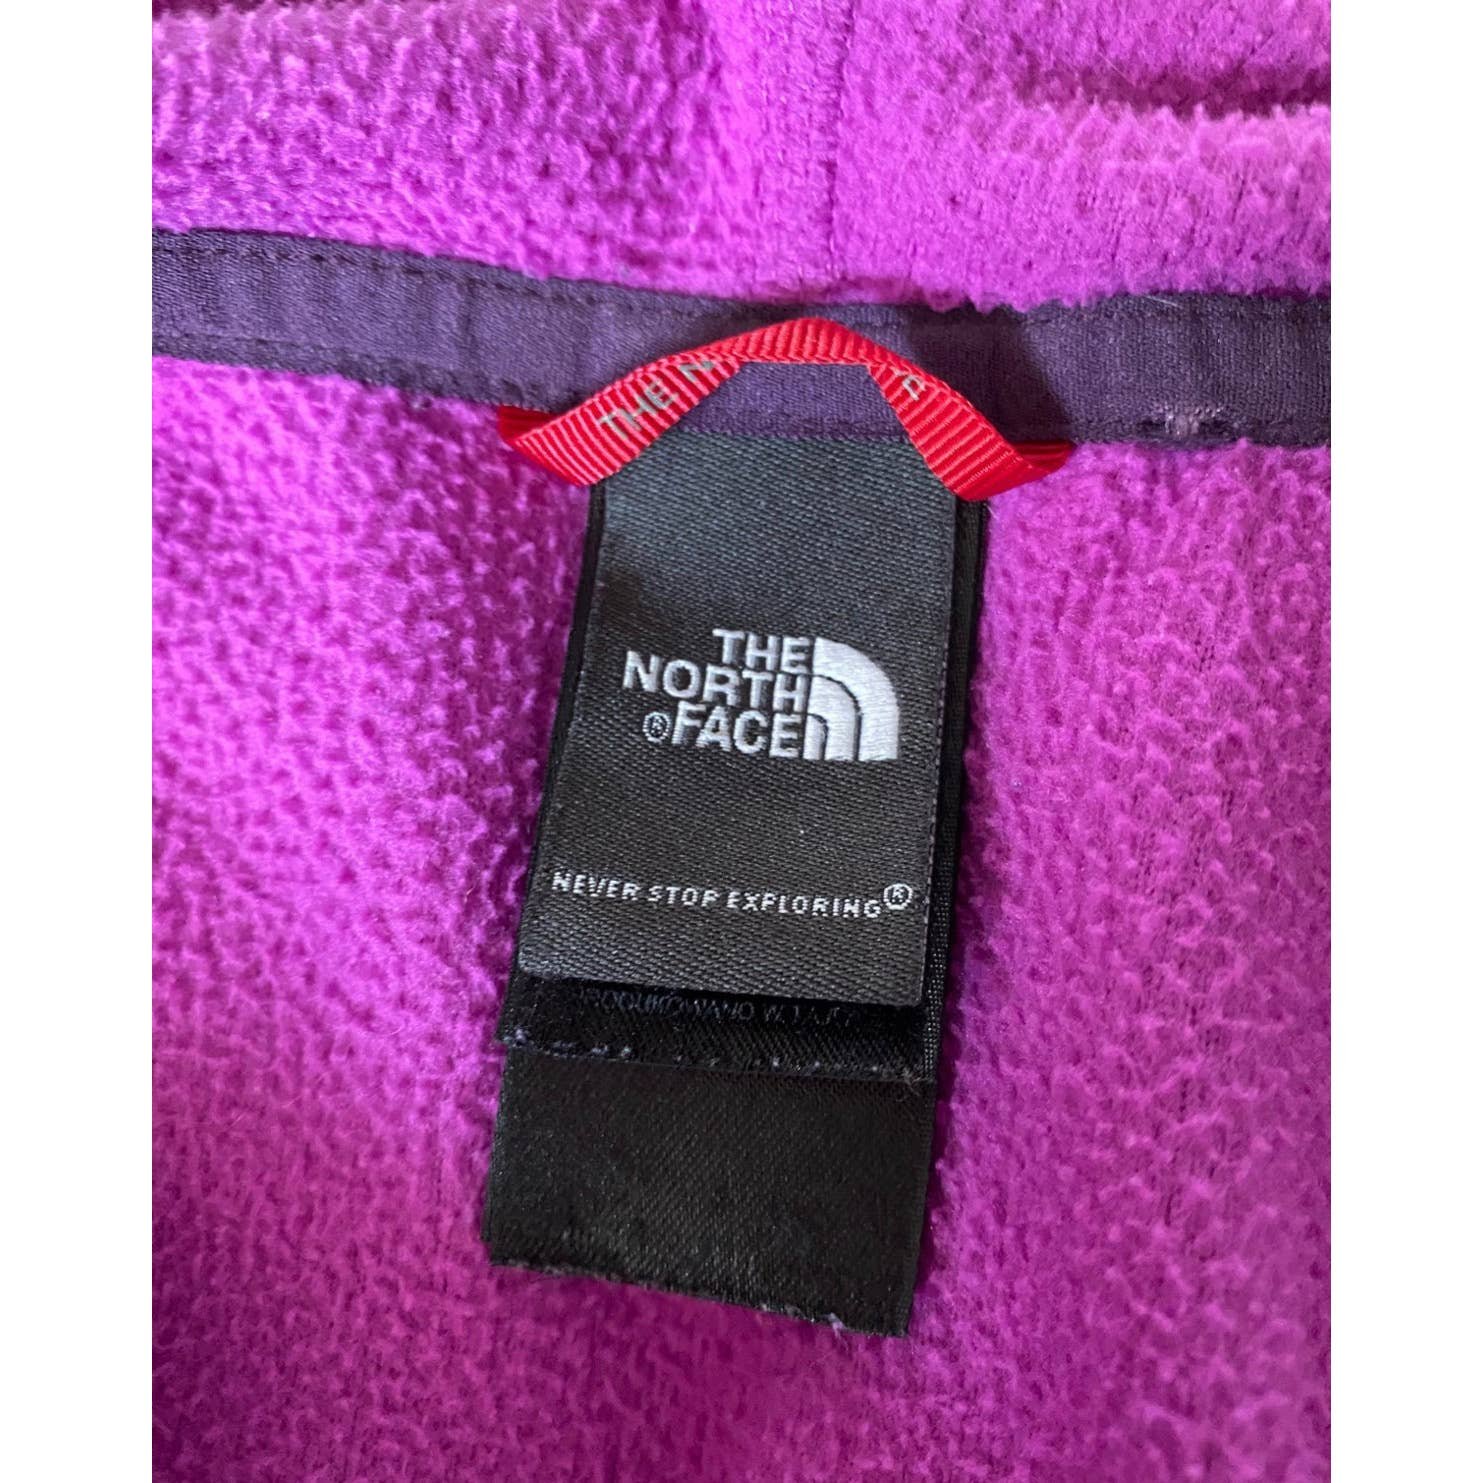 the Lowest price North Face Womens Purple Fleece Jacket small ObP3lp5RK no tax